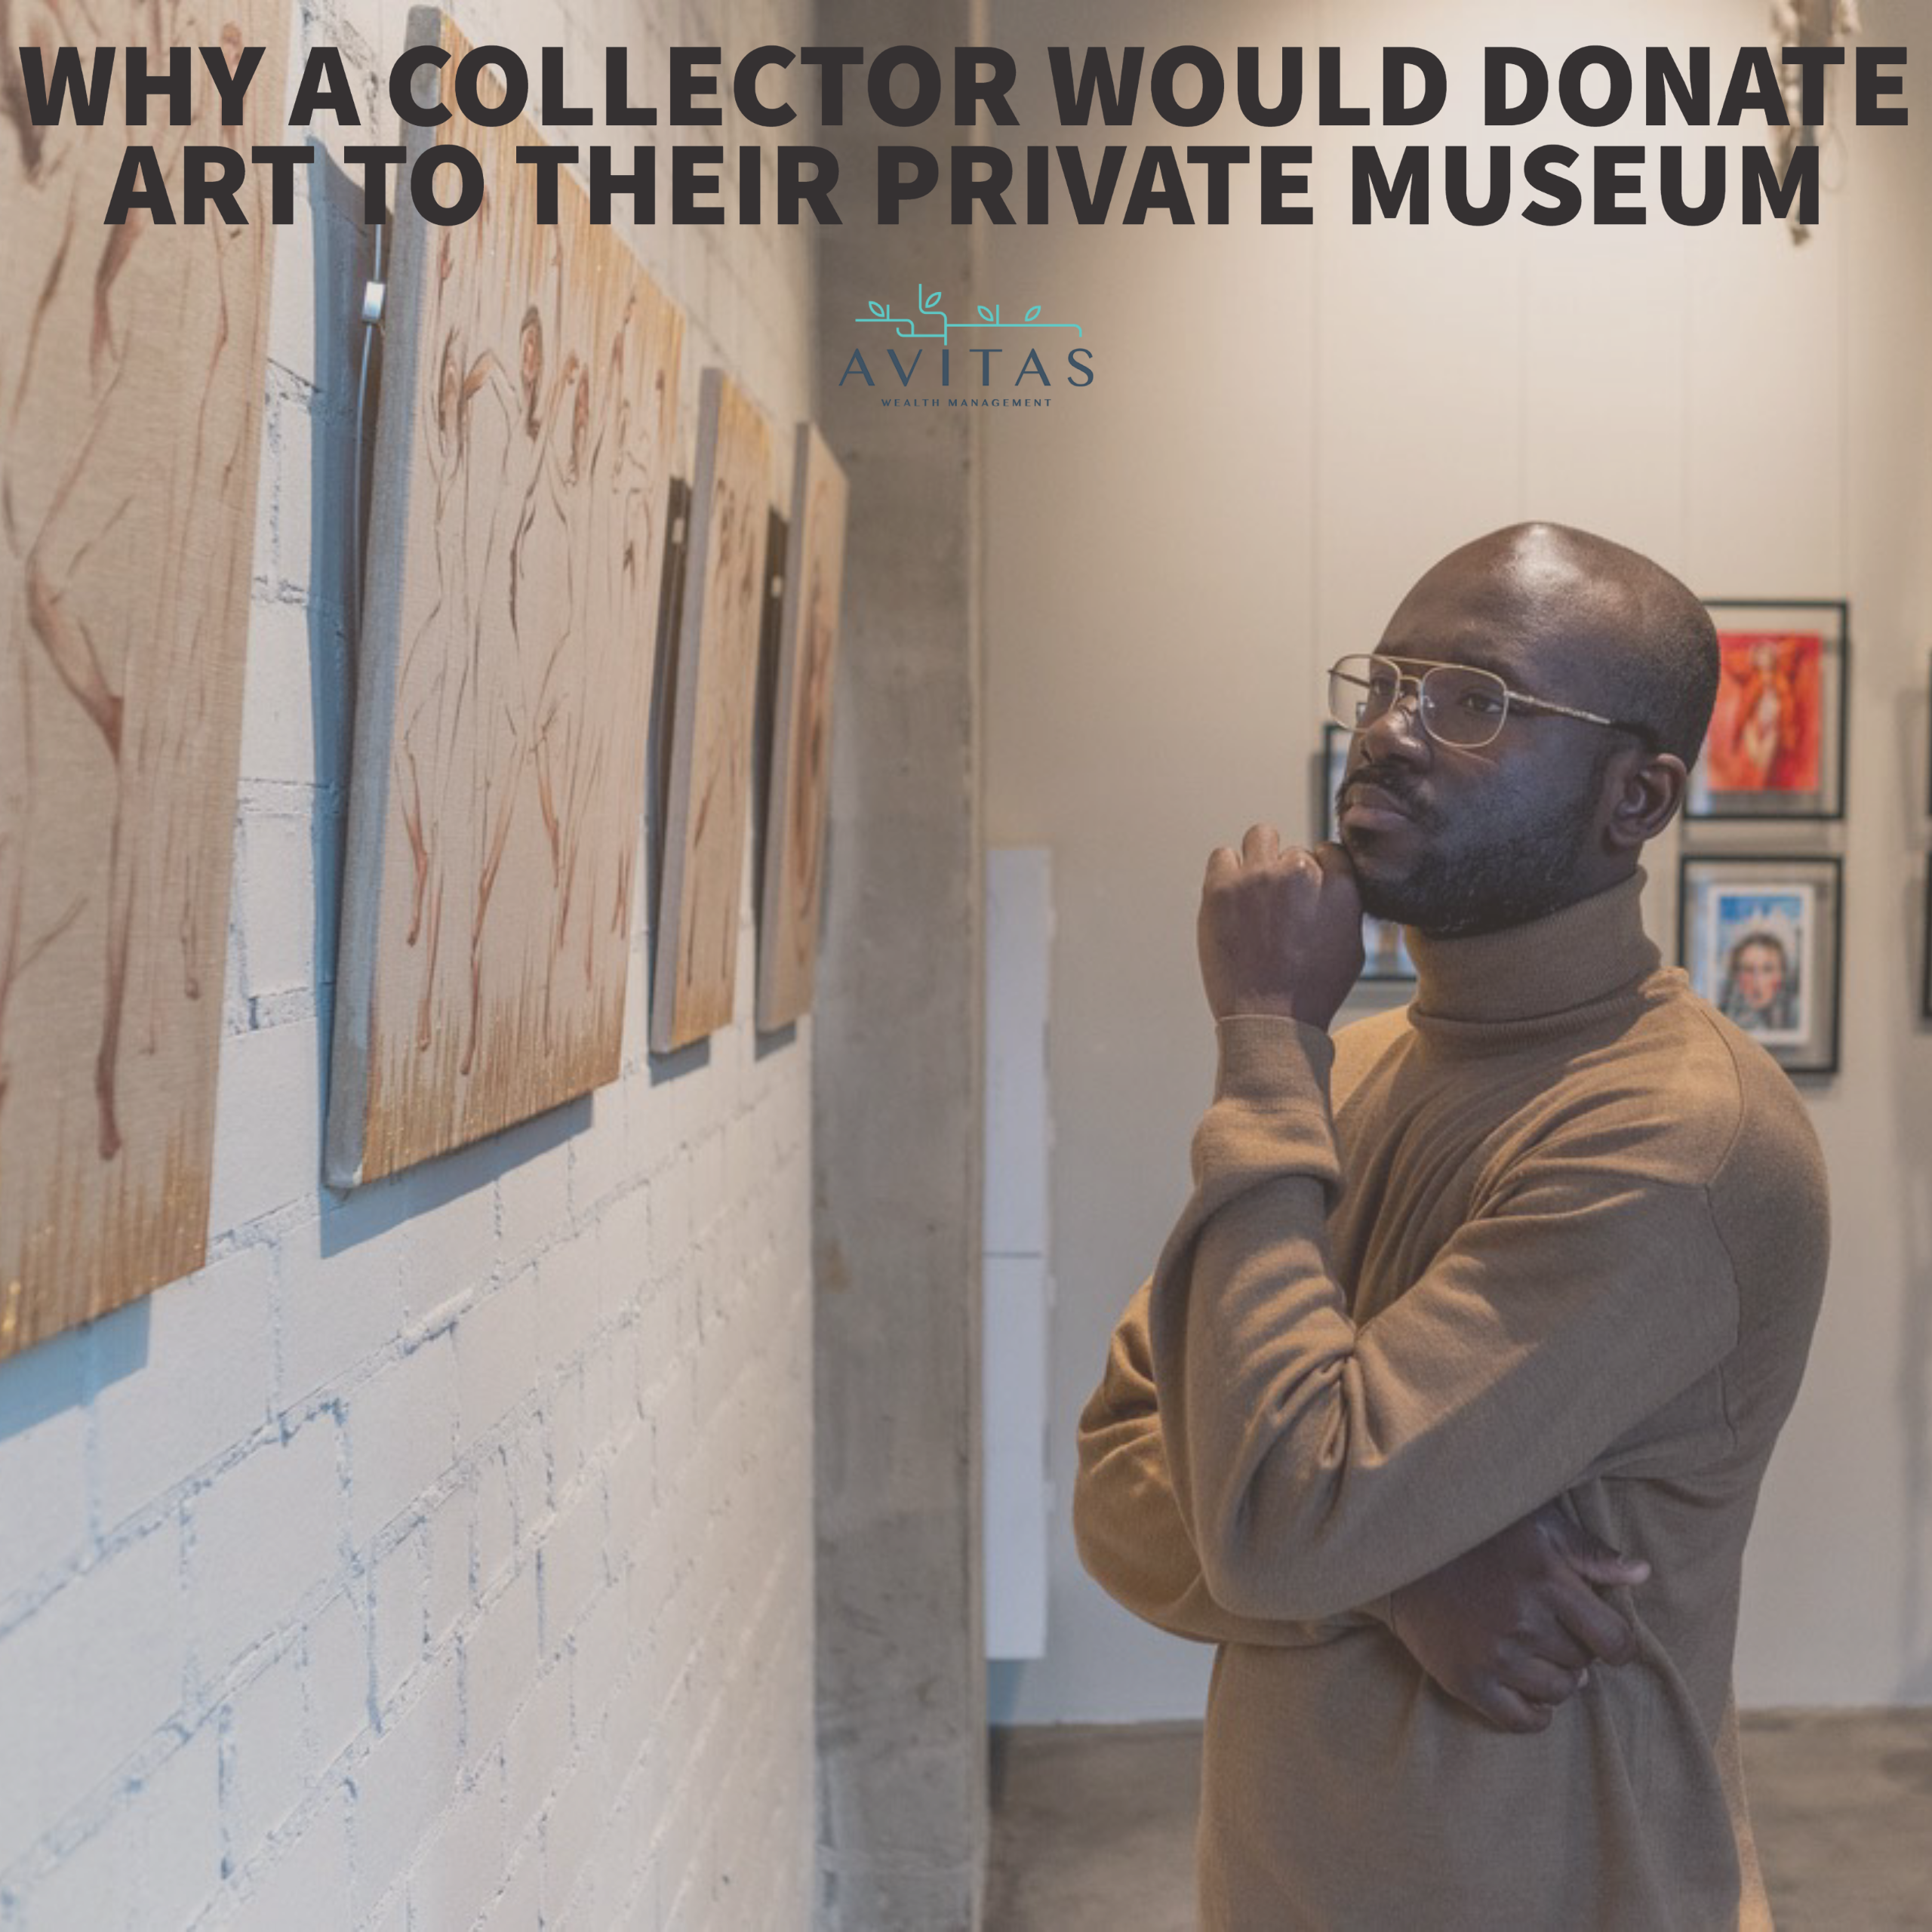 Why A Collector Would Donate Art To Their Private Museum